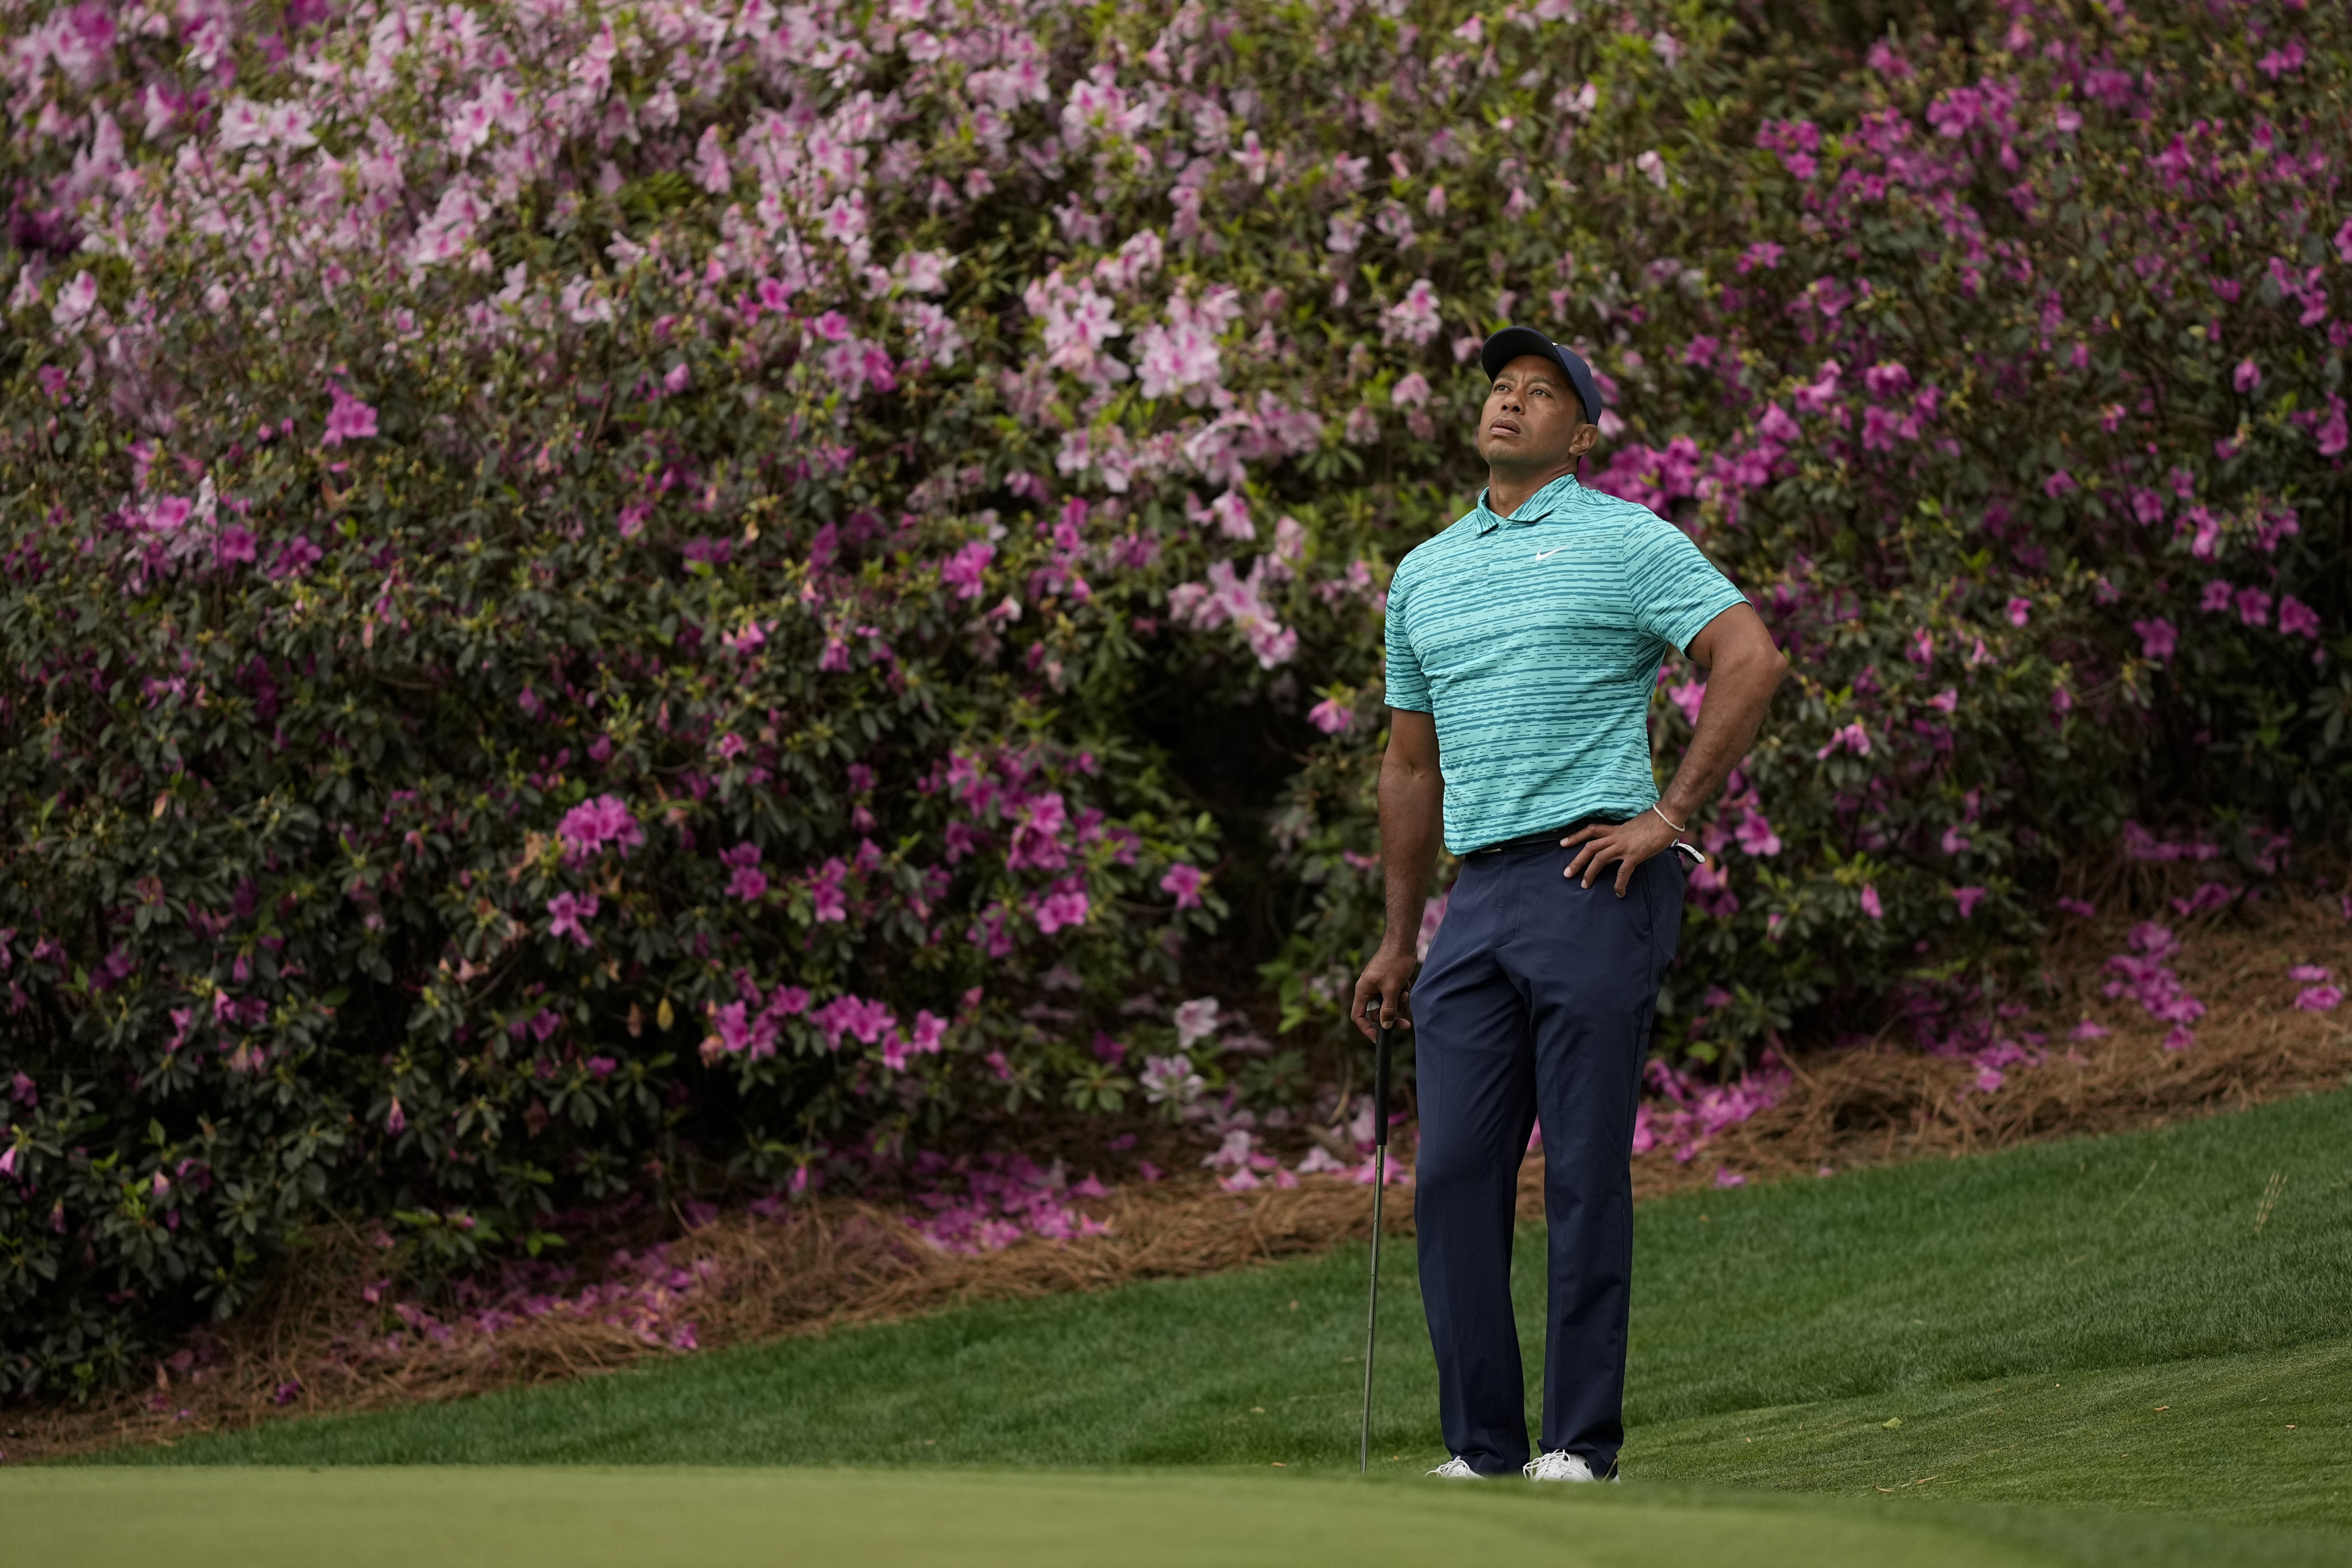 Tiger Woods waits to putt on the 13th green during the second round at the Masters golf tournament in Augusta. Photo: AP